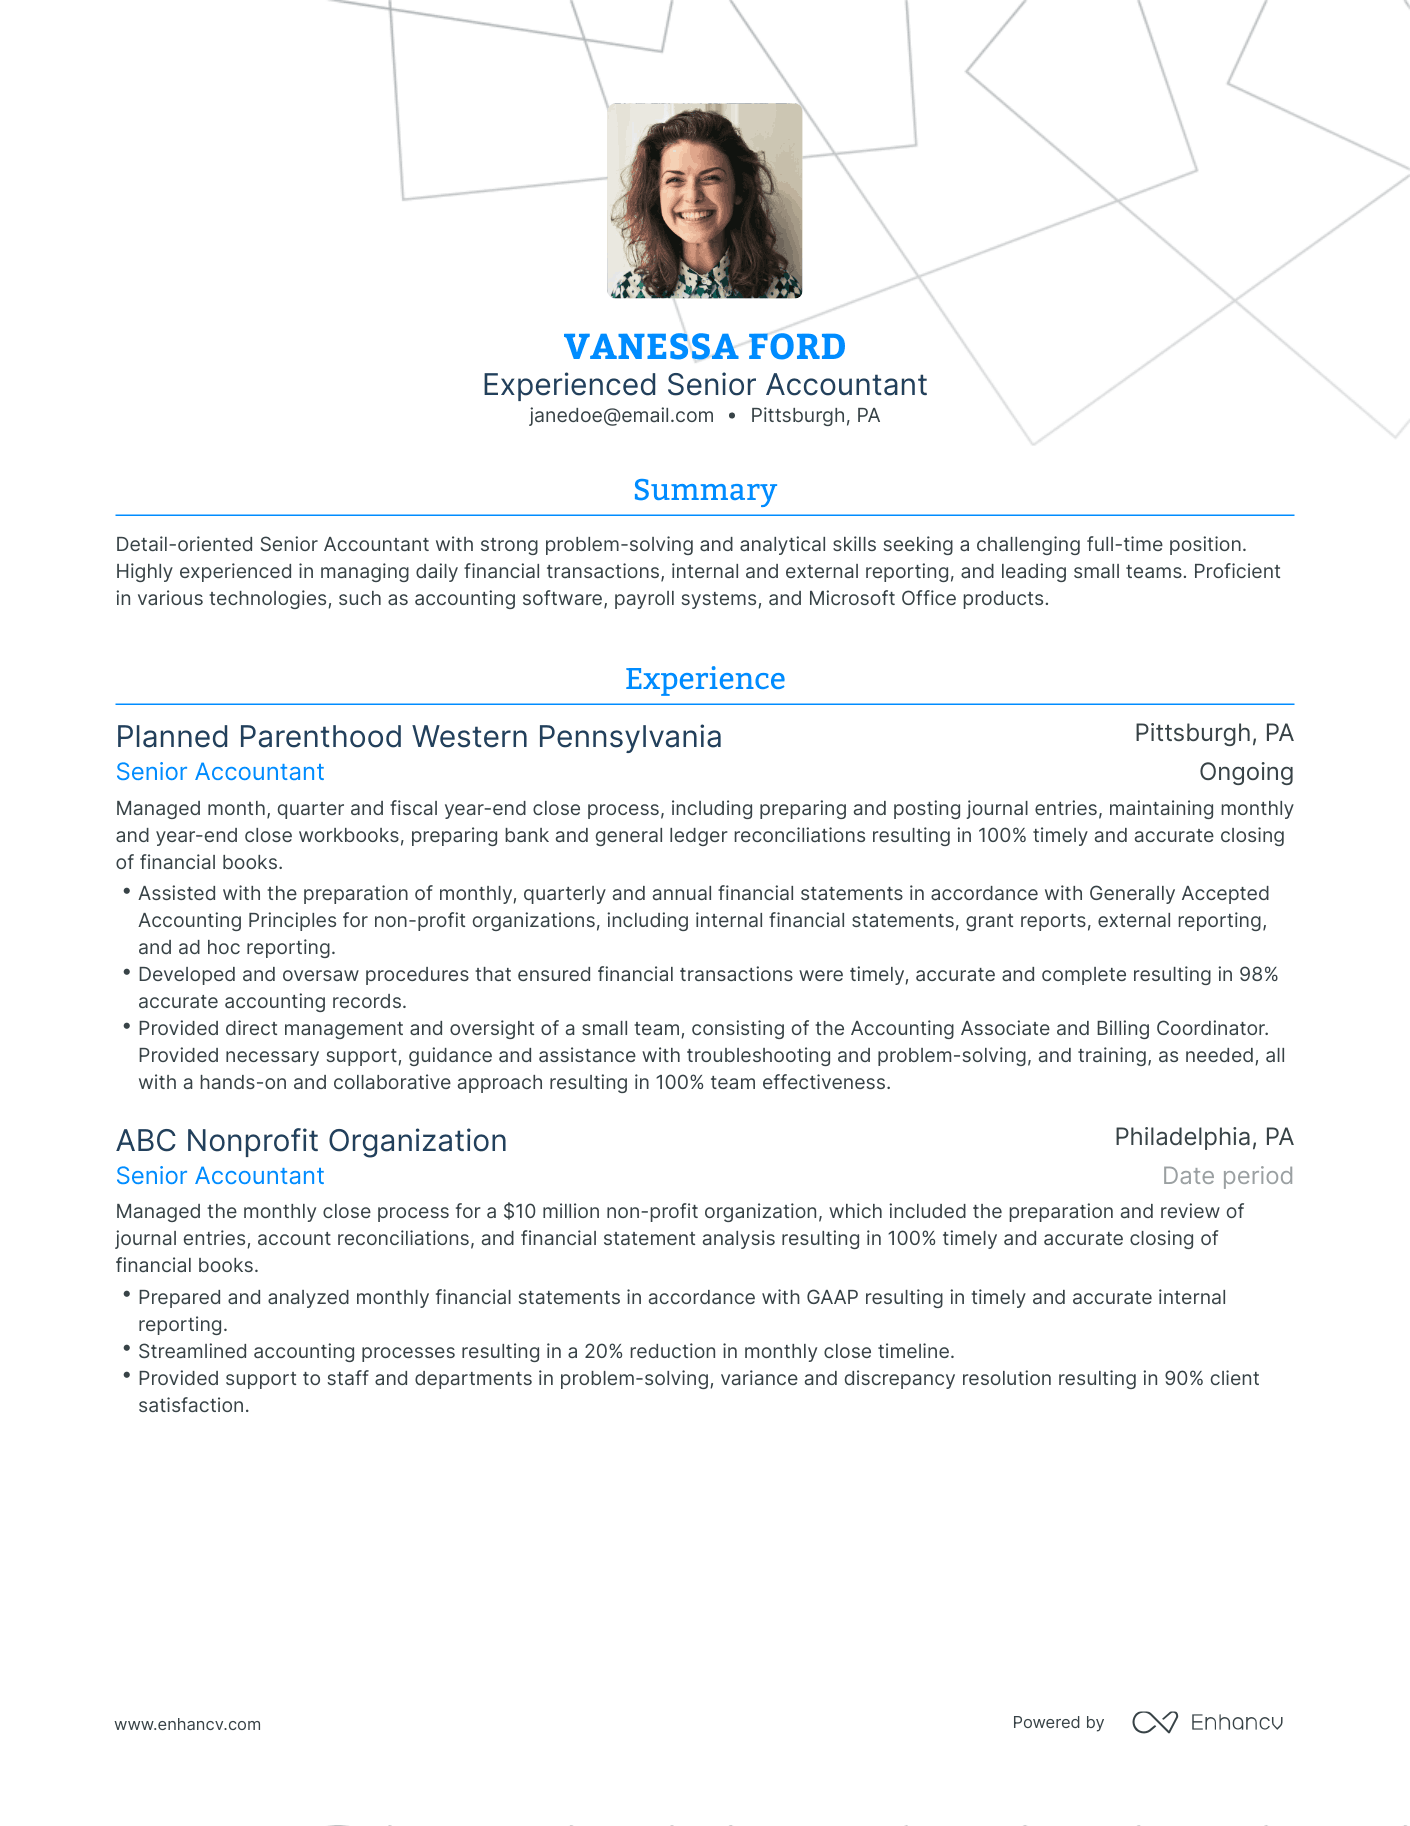 Traditional Full Cycle Accounting Resume Template